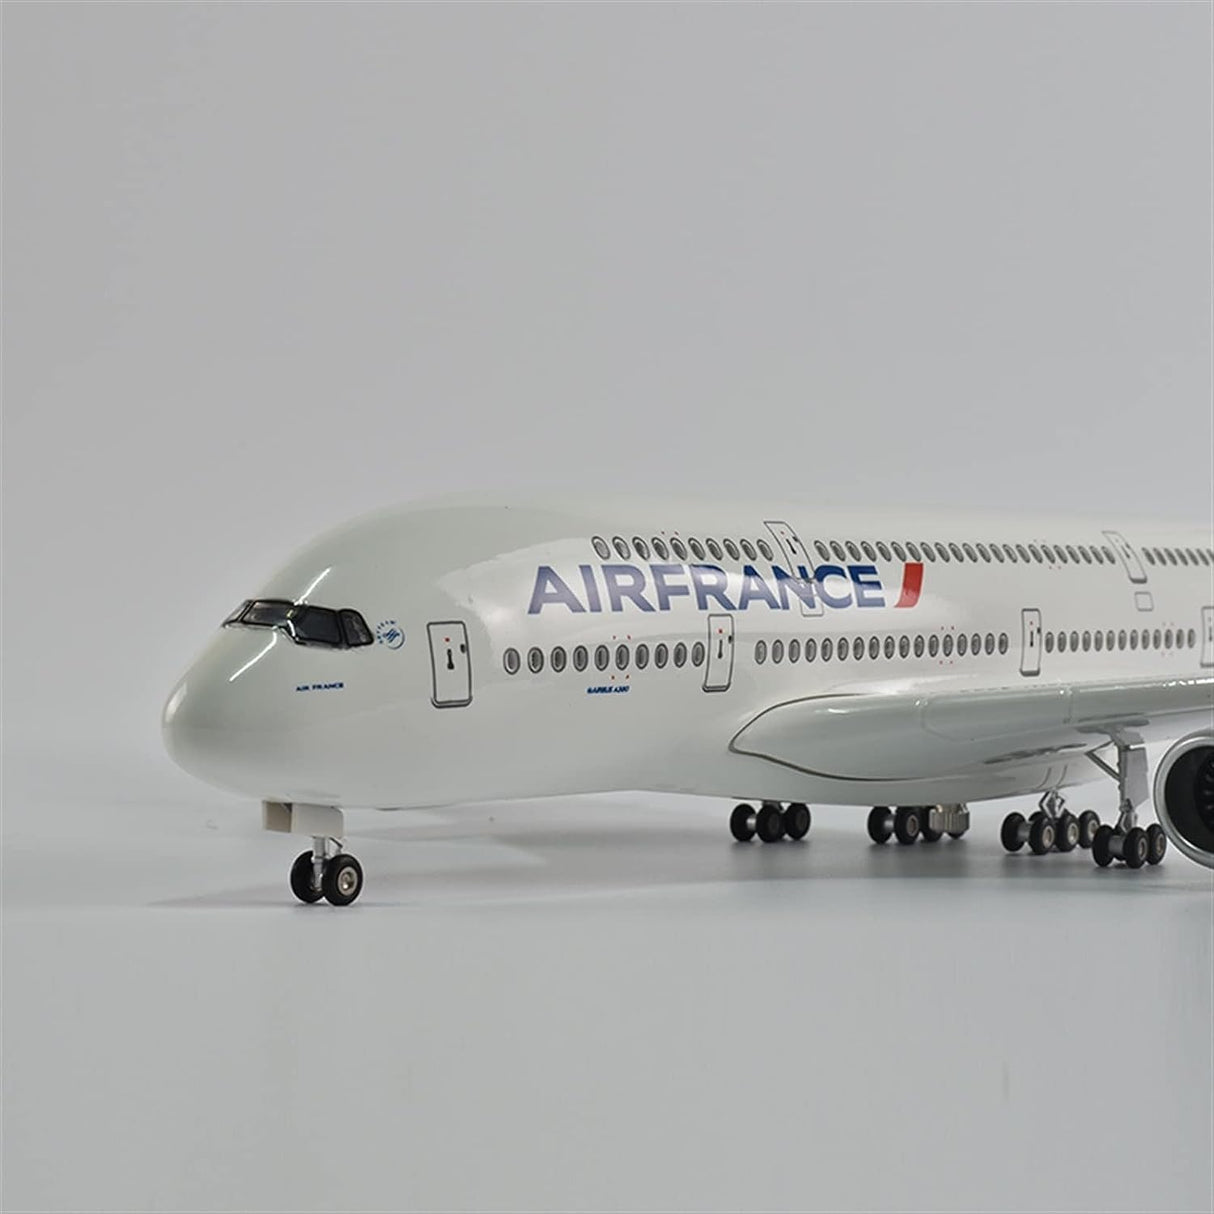 Air France Airbus A380 Airplane models 45.5cm Scale 1:160  With Landing Gear (No Light)